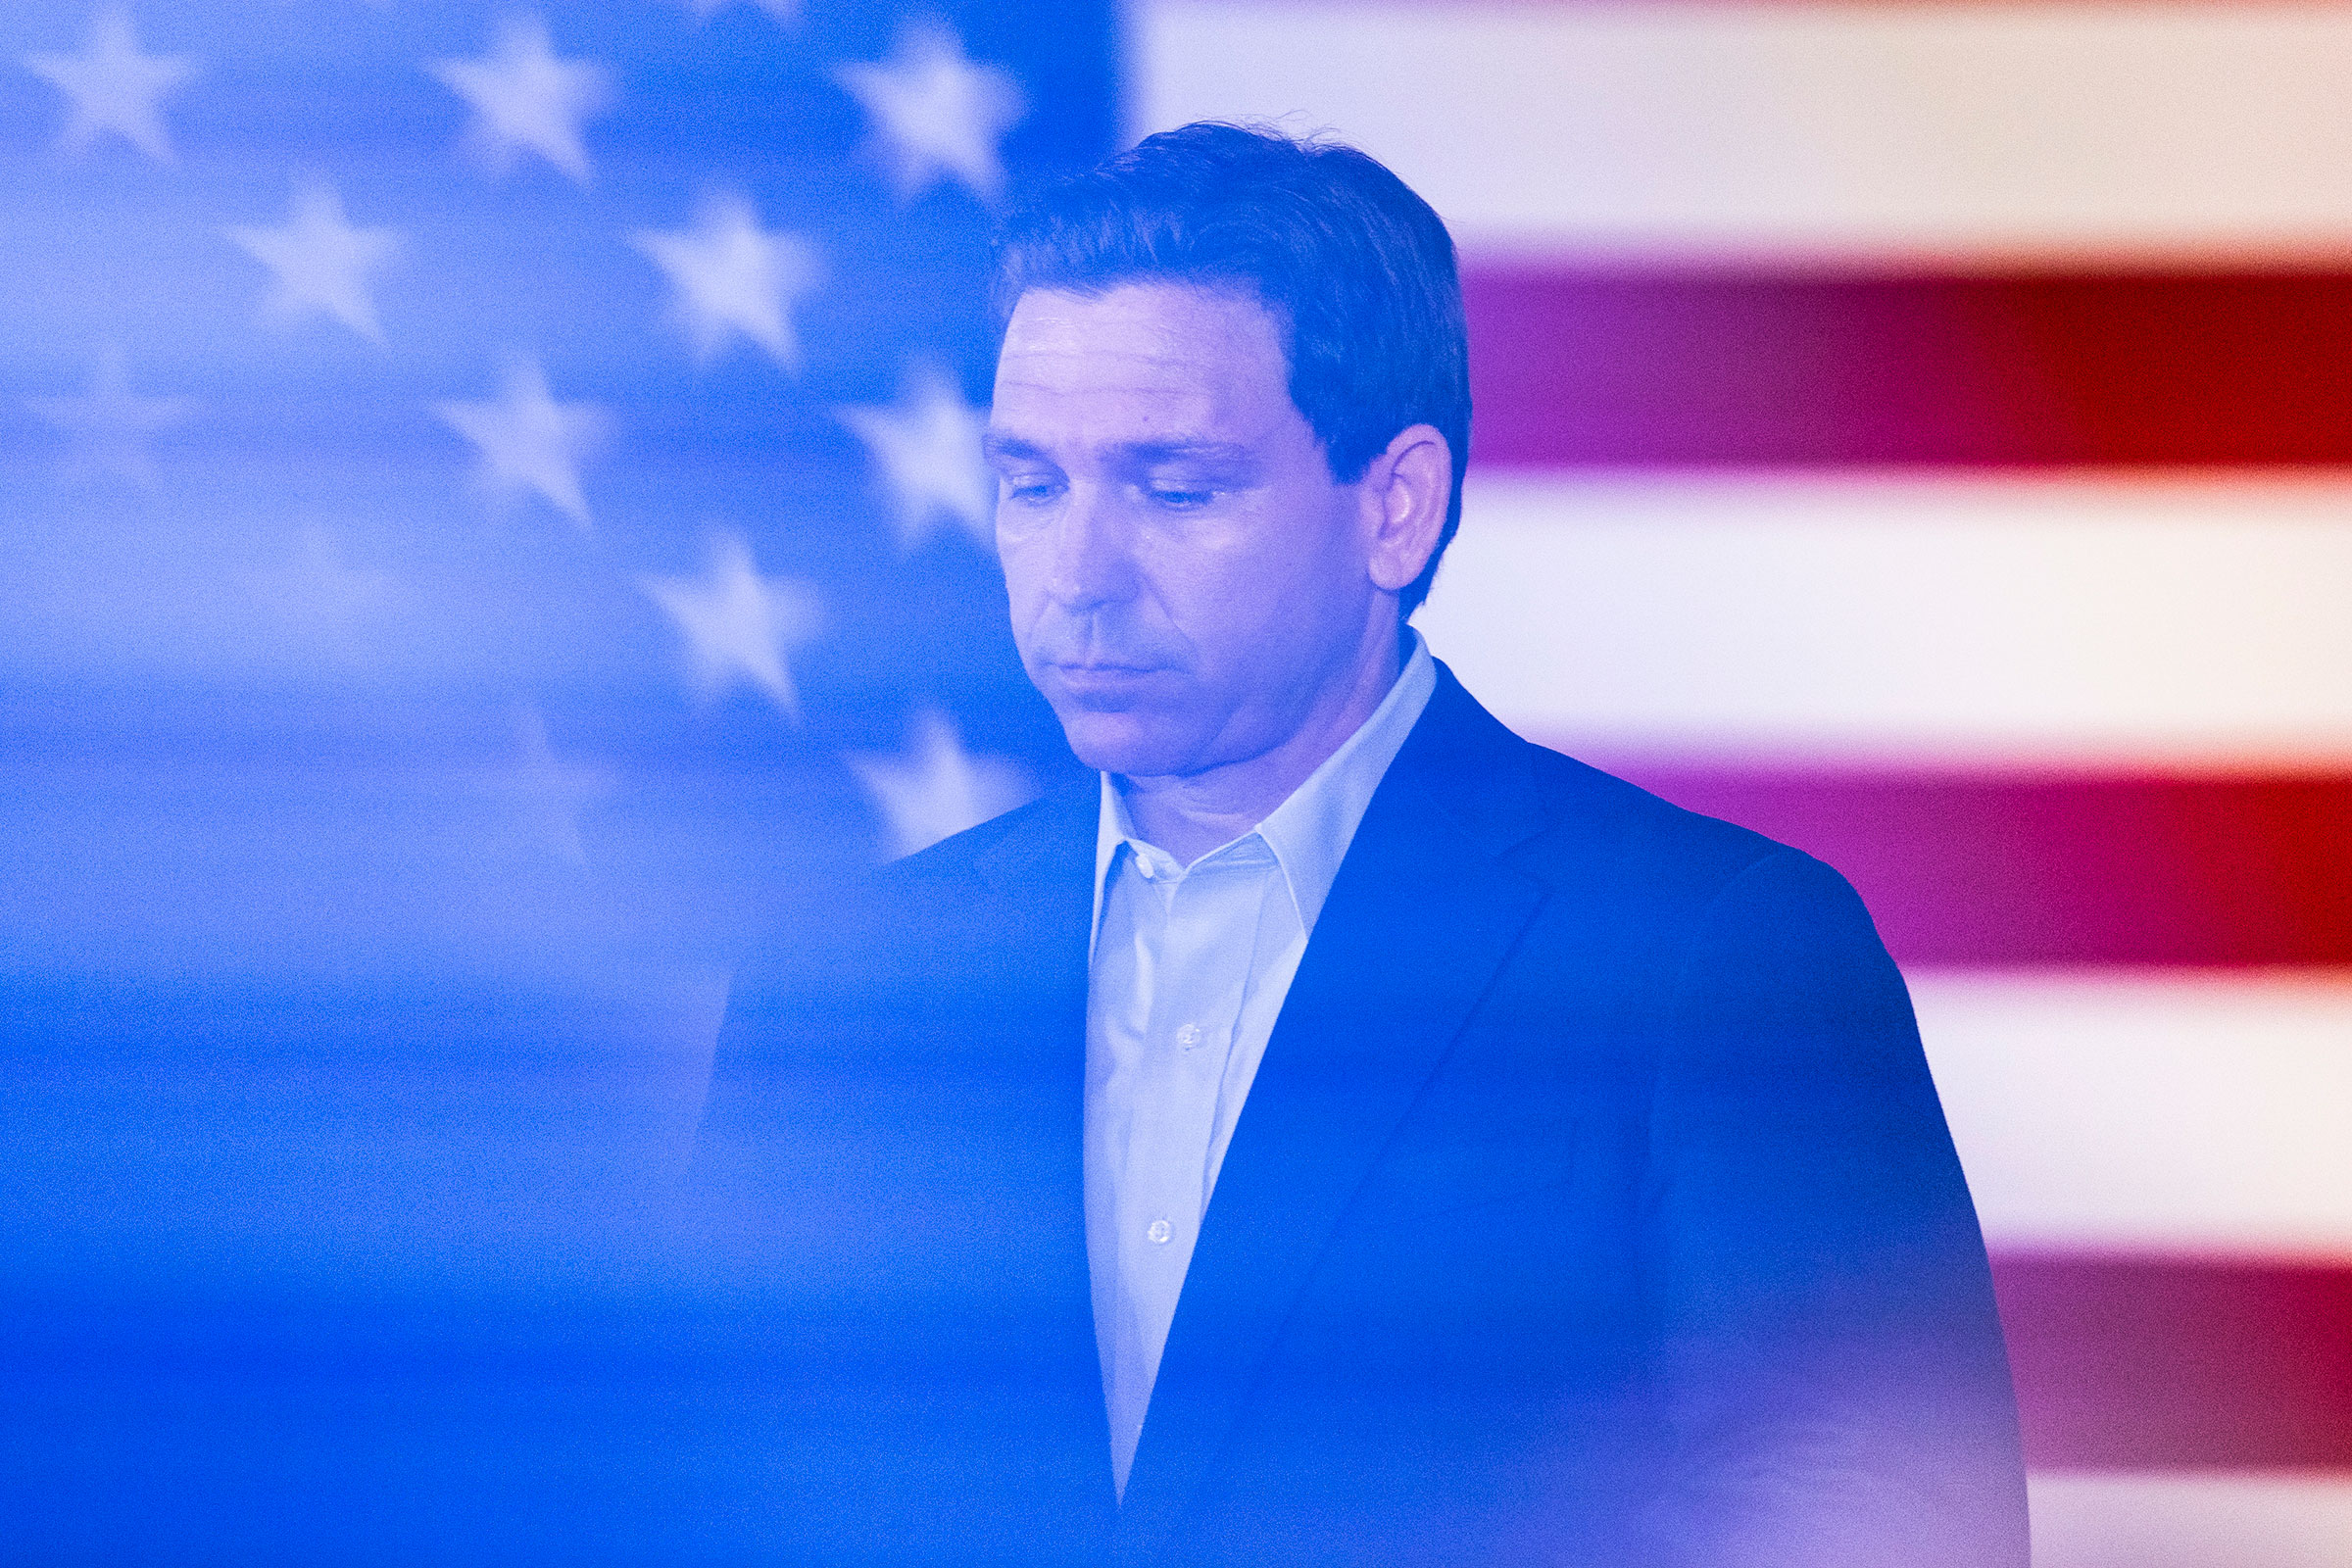 DeSantis speaks during a town hall event at the Alpine Grove Banquet Facility in Hollis, NH on June 27, 2023. (Adam Glanzman—For The Washington Post/Getty Images)